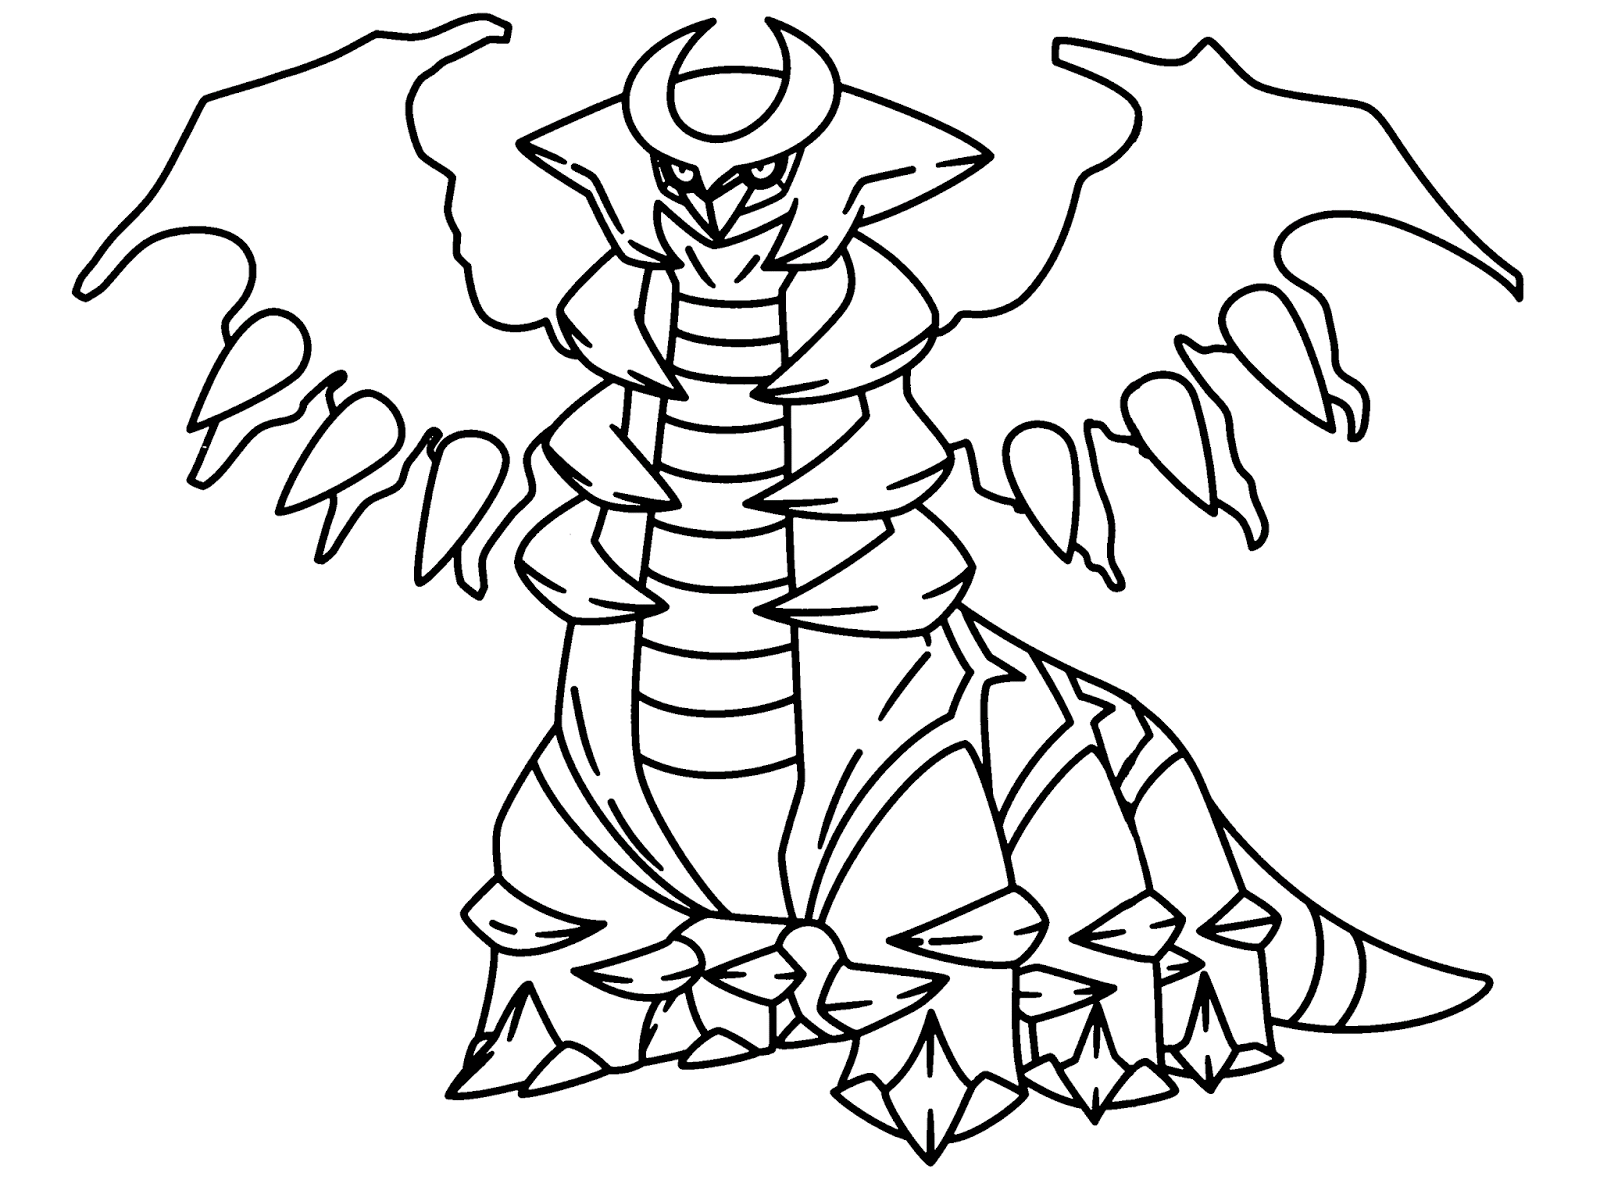 Lugia Legendary Pokemon Coloring Pages Coloring4free Coloring4free Com